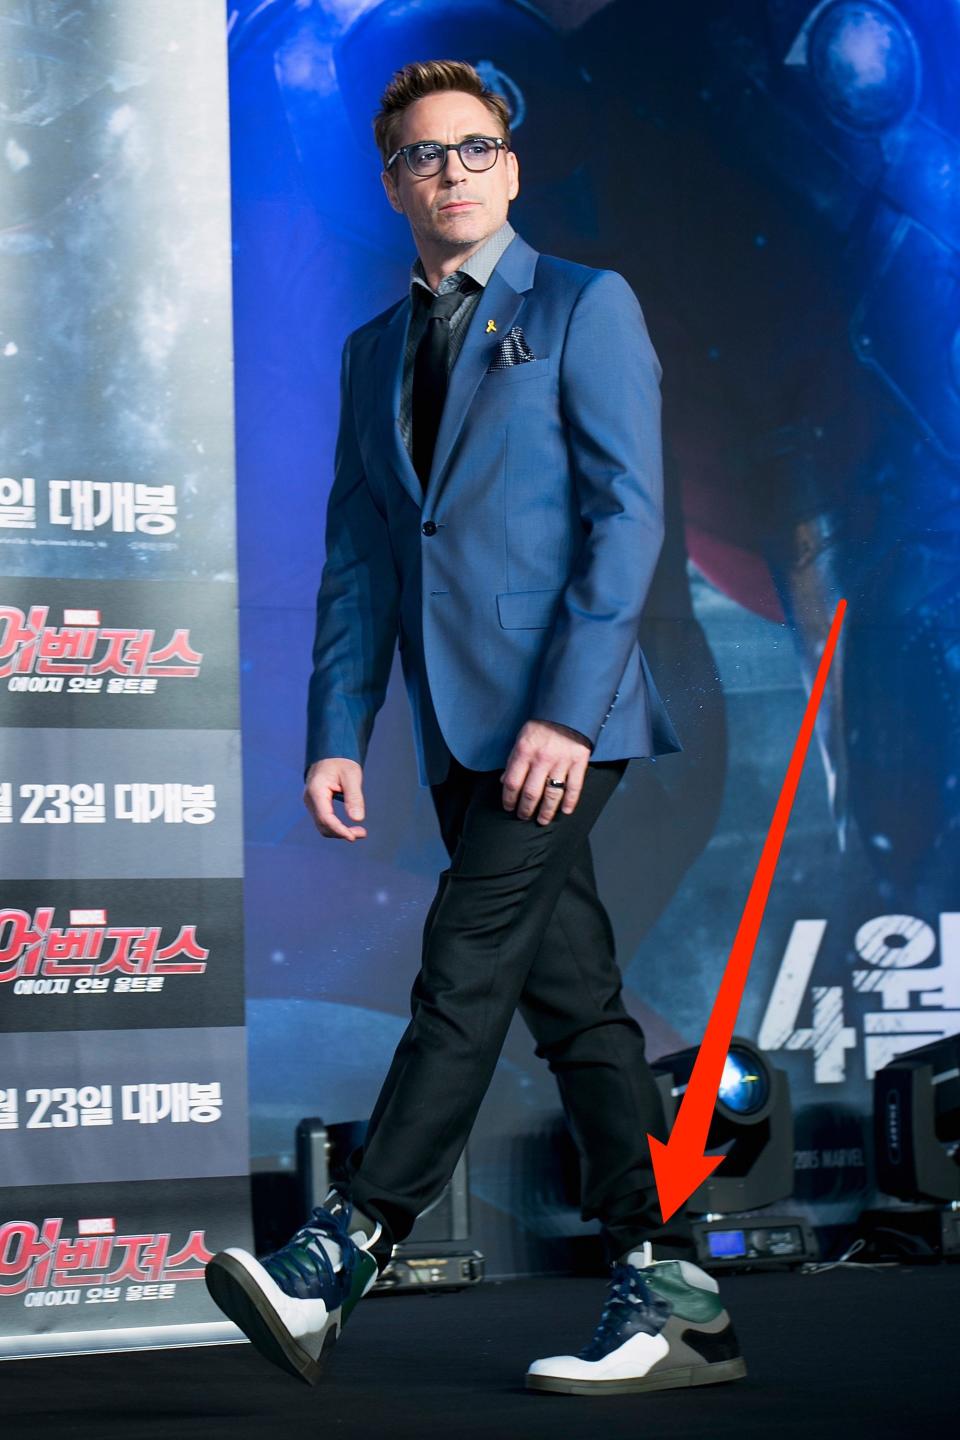 Robert Downey Jr in a blue suit with sneakers